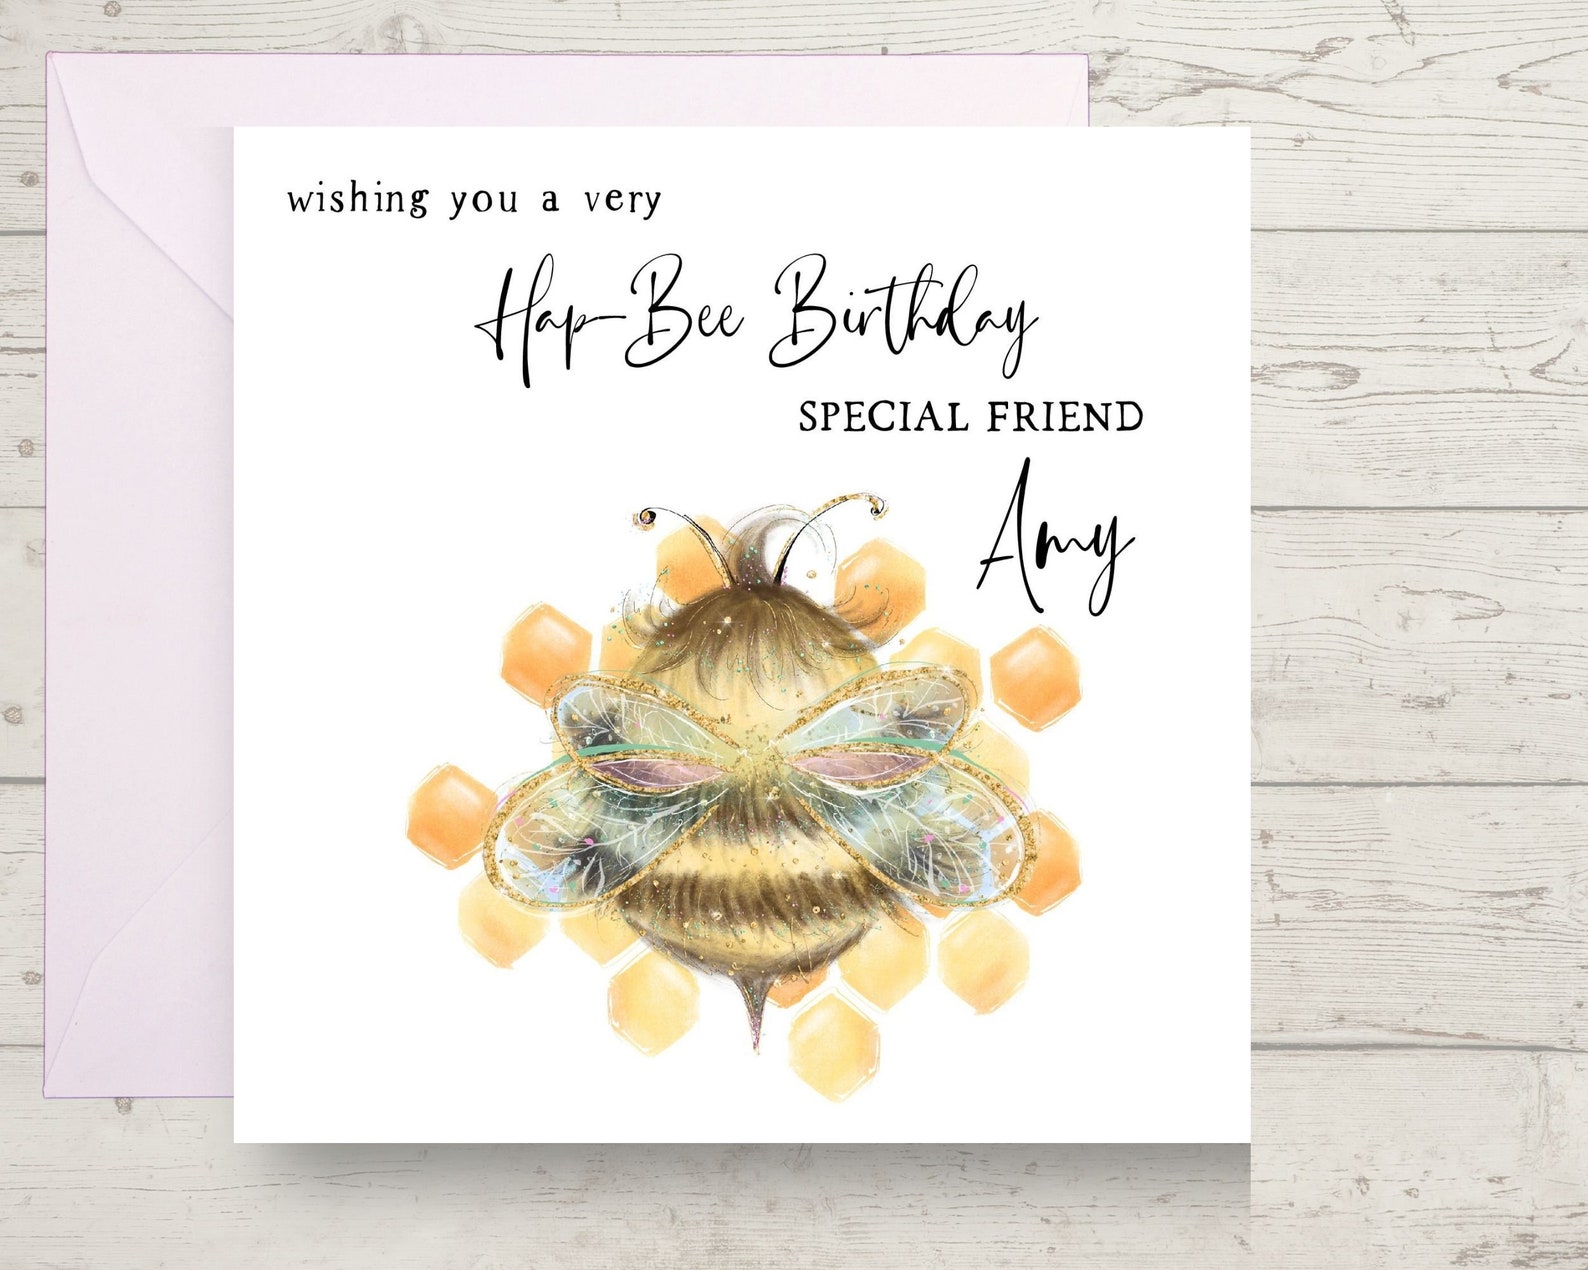 Hap-Bee Birthday Bee Birthday Card for Friend Bumble Bee | Etsy